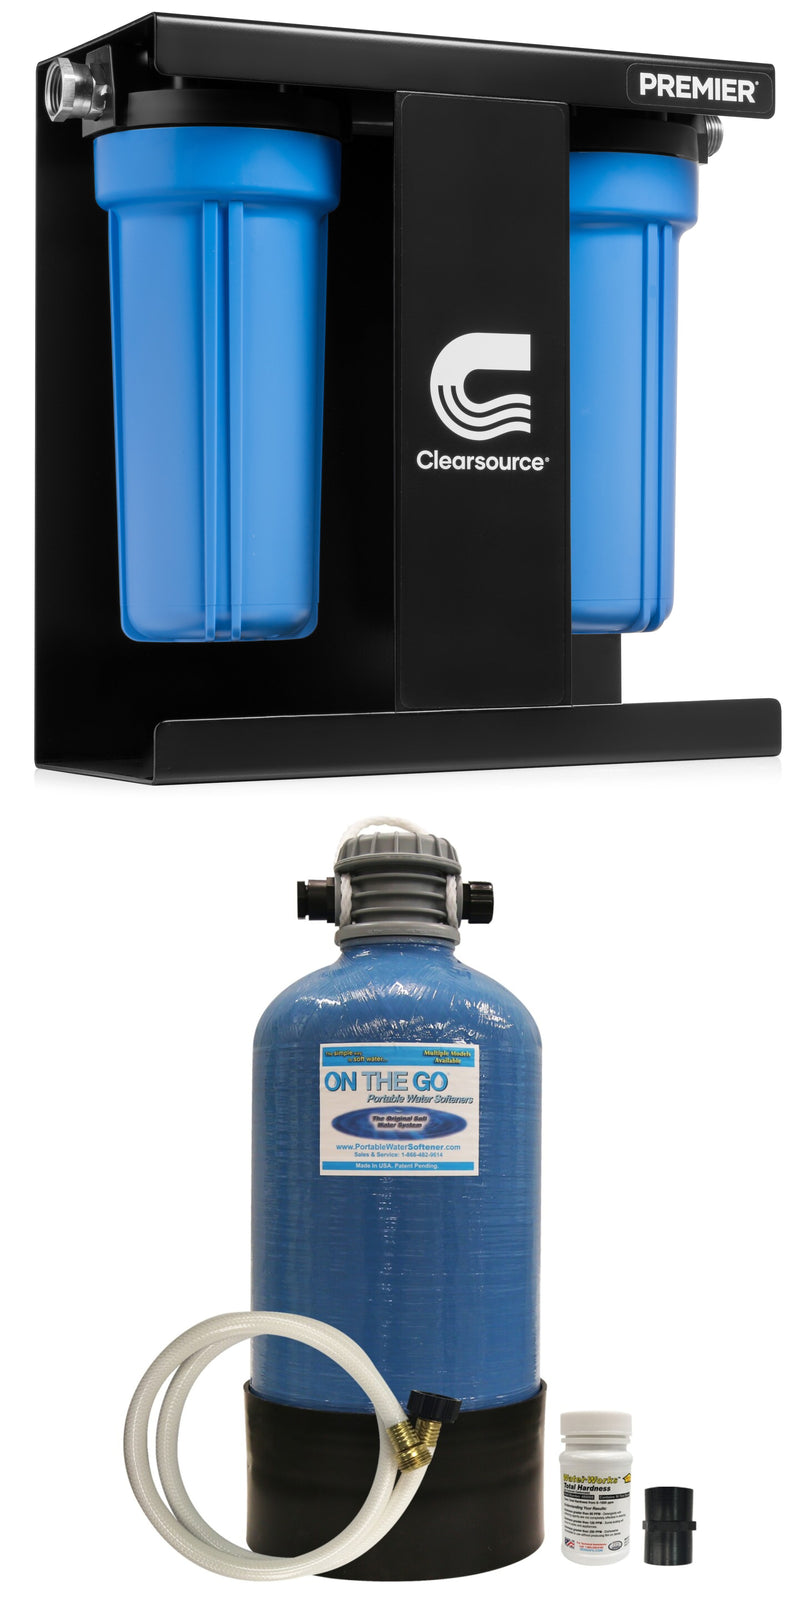 Clearsource 2 canister and on the go double water softener bundle